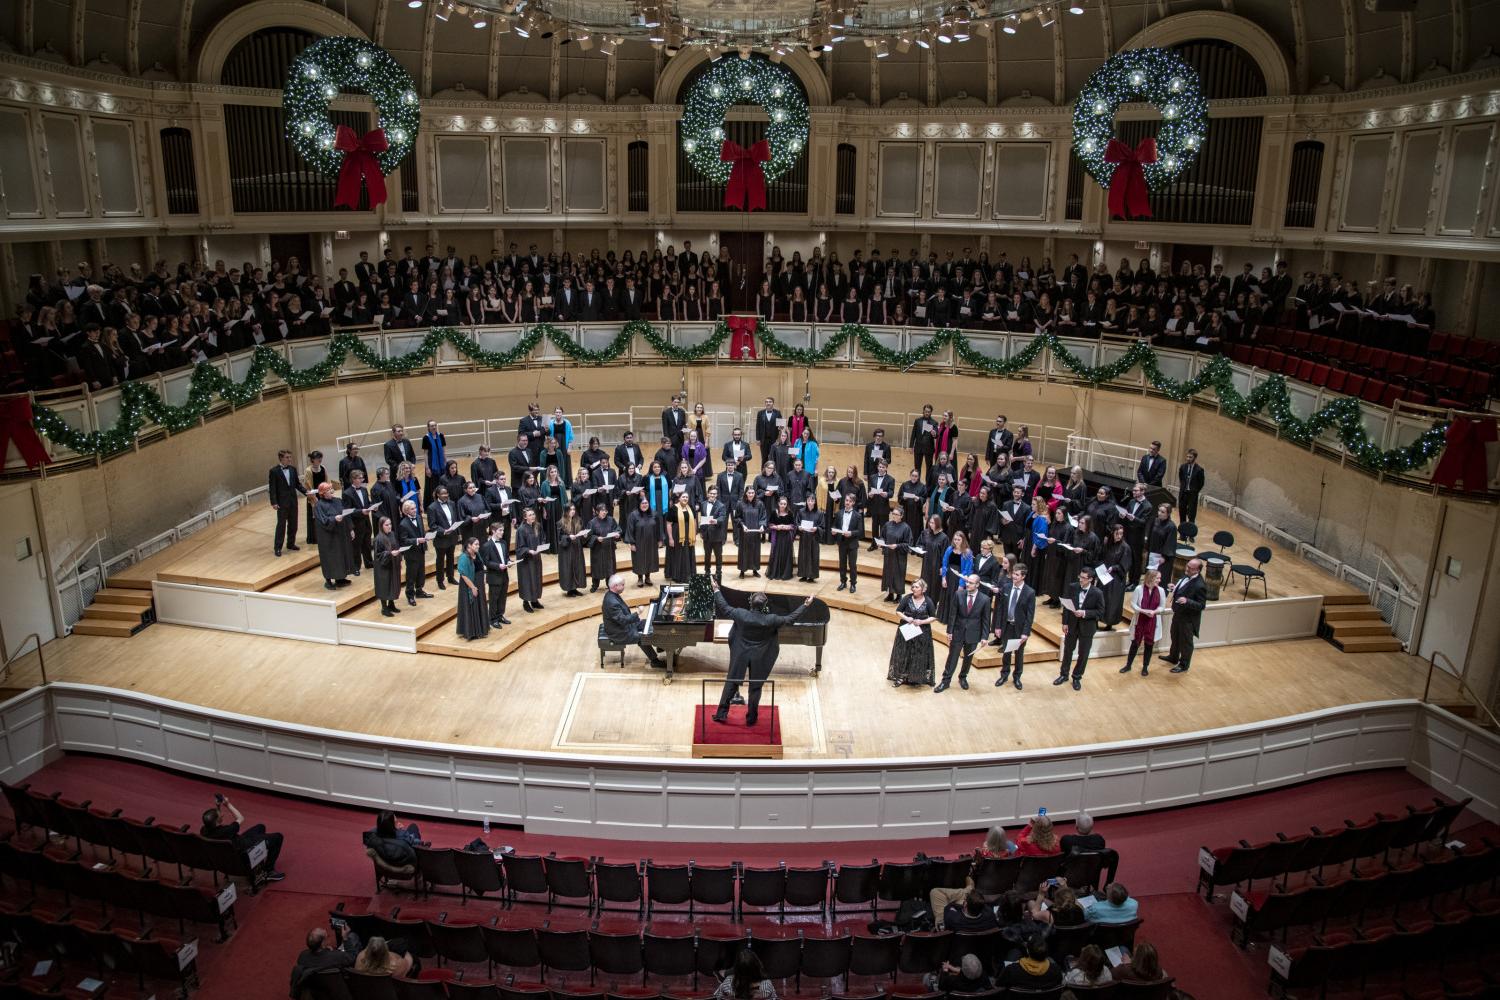 The <a href='http://unity.shpt100.net'>全球十大赌钱排行app</a> Choir performs in the Chicago Symphony Hall.